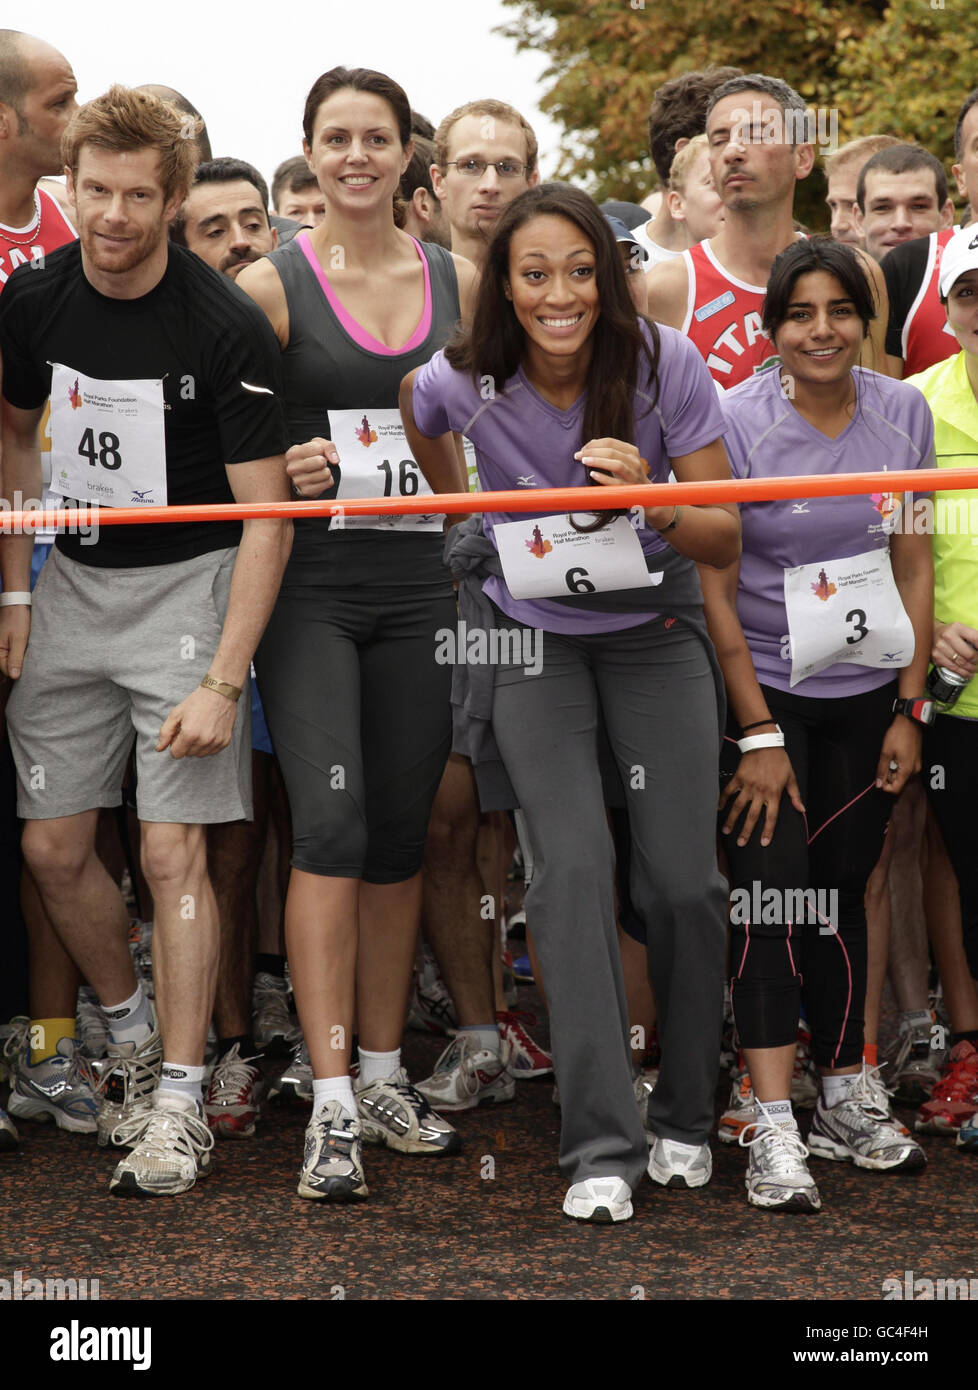 Celebrity participants, including (left to right front row) Tom Aiken, Beverley Turner, Rachel Christie and Rani Price taking part in the Royal Parks Foundation Half Marathon, which starts and ends in Hyde Park in central London. Stock Photo